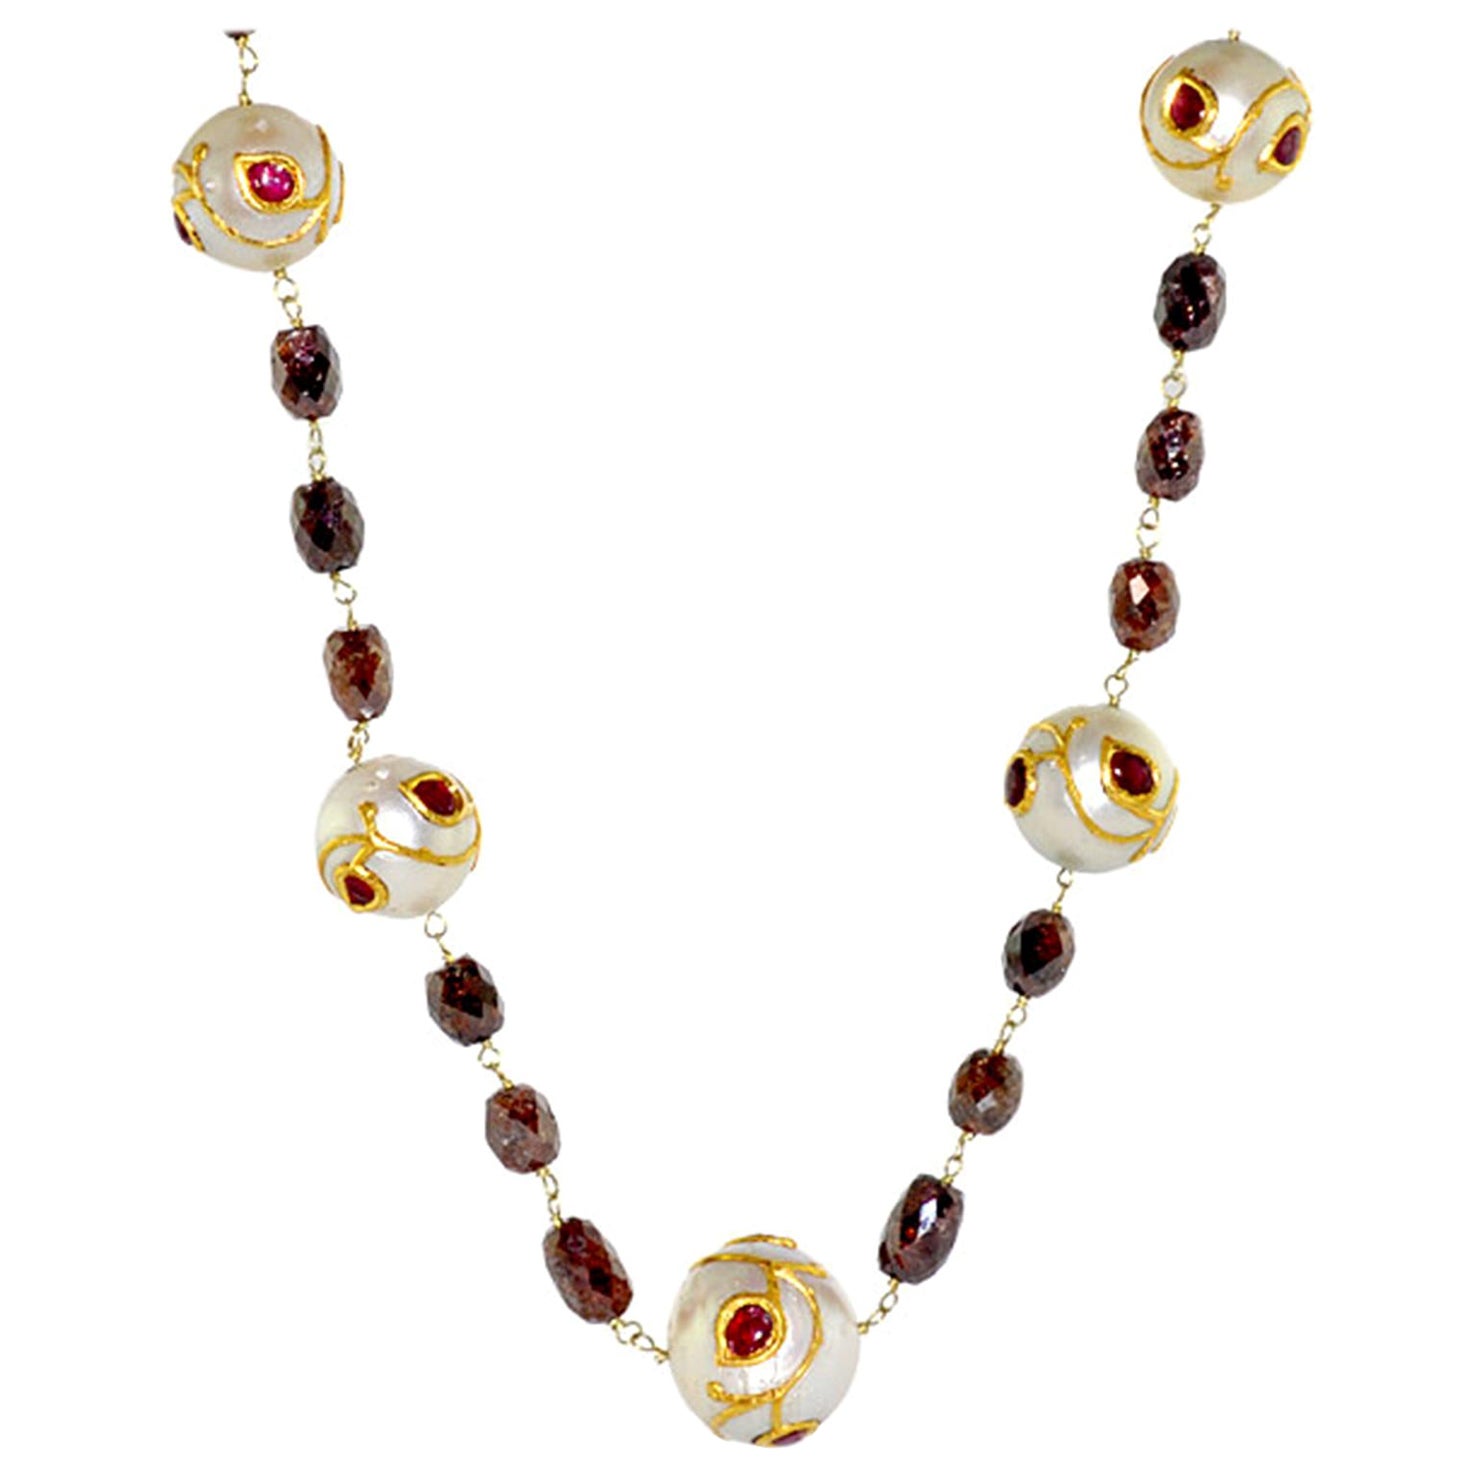 Designer Beaded Necklace with Diamonds, Ruby and South Sea Pearl in 14k Gold